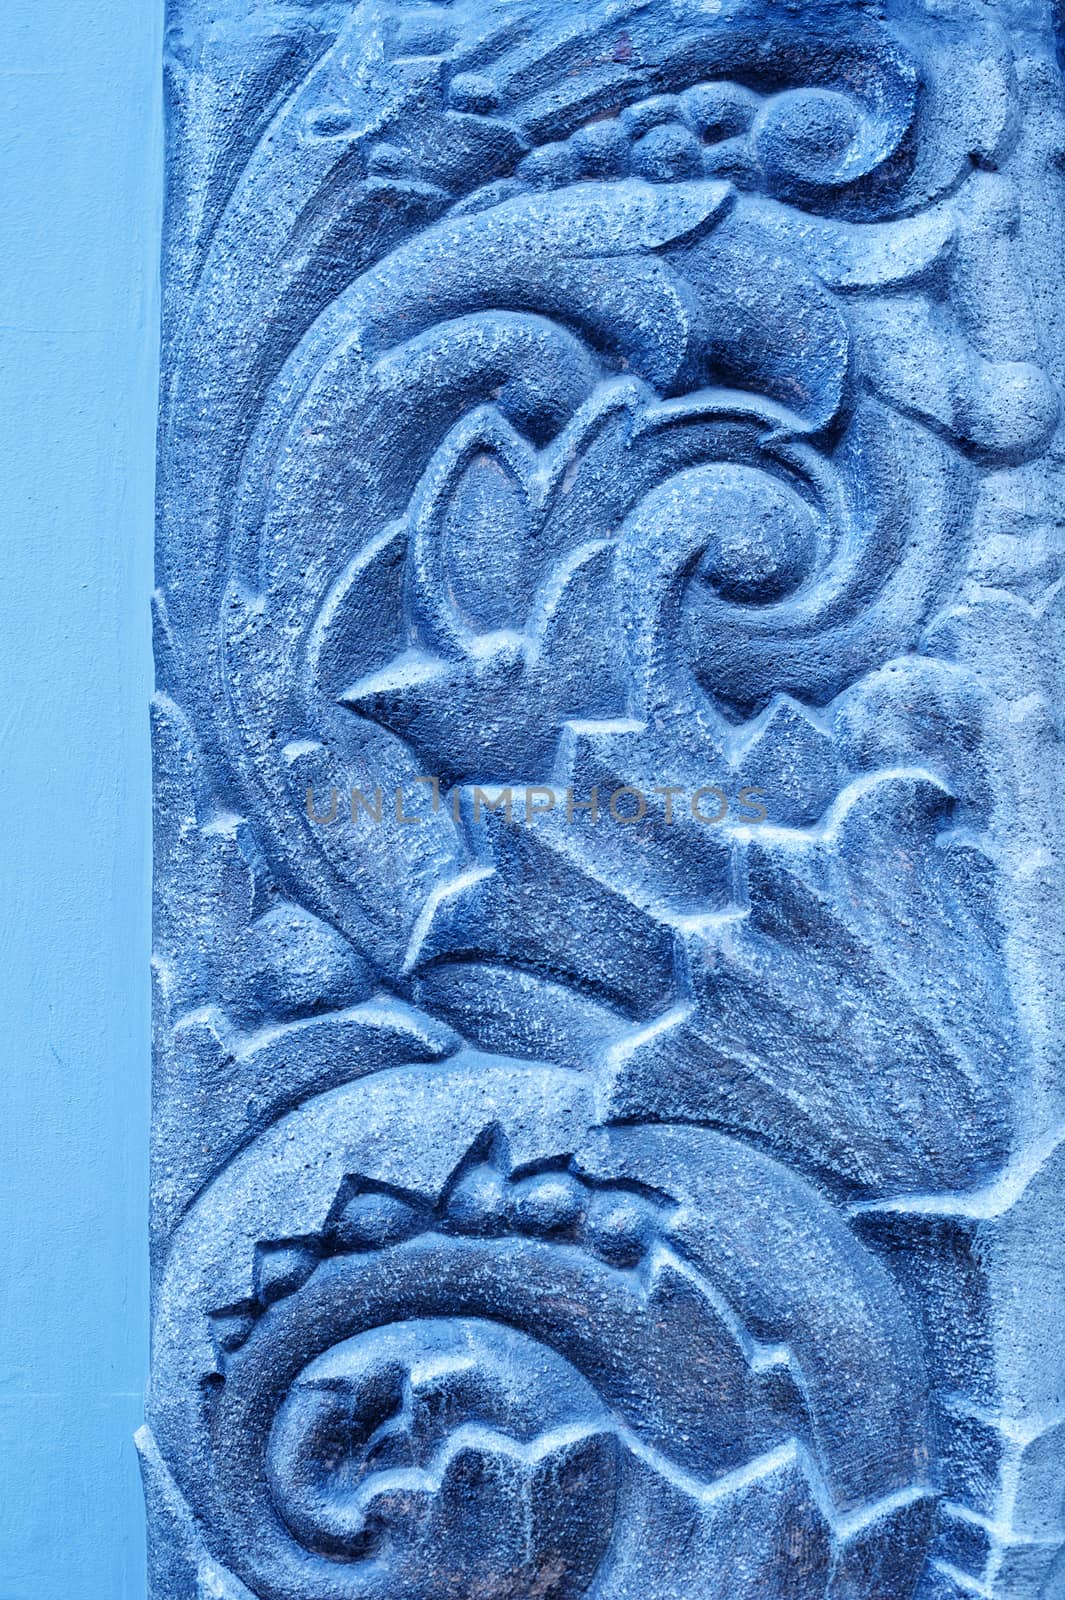 blue plaster mural on a wall background.